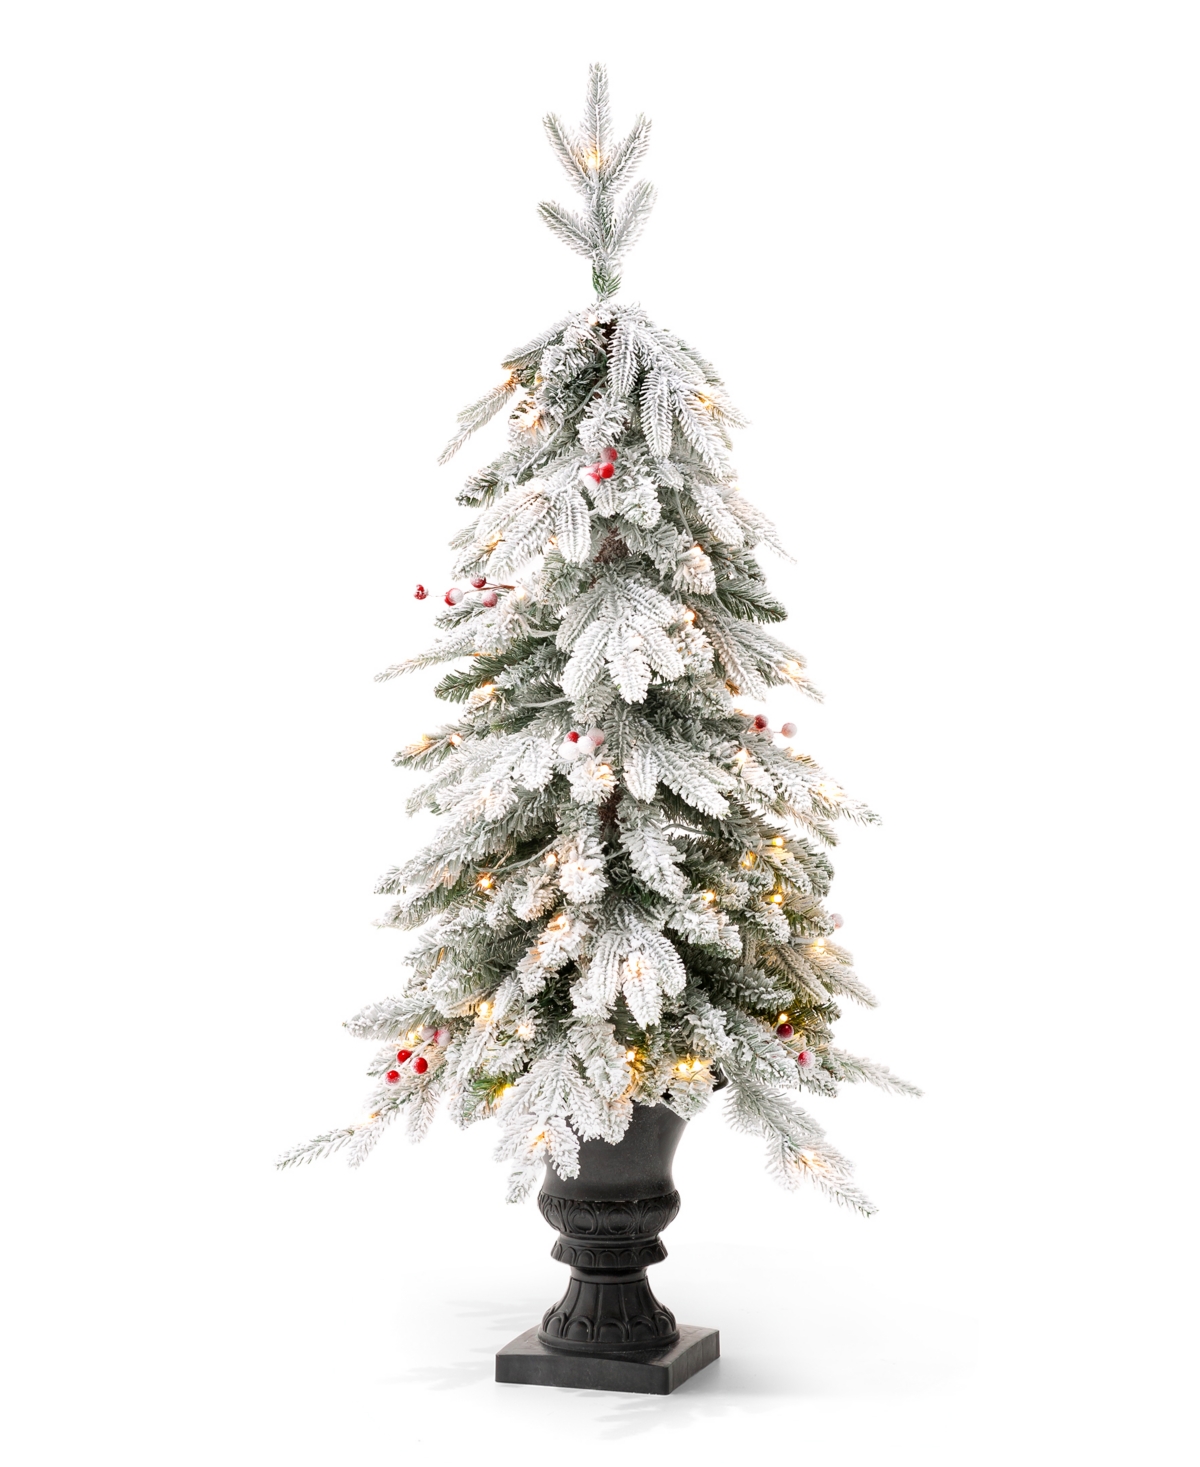 4' Pre-Lit Flocked Fir Artificial Christmas Porch Tree with 100 Warm White Lights and Red Berries - Multi